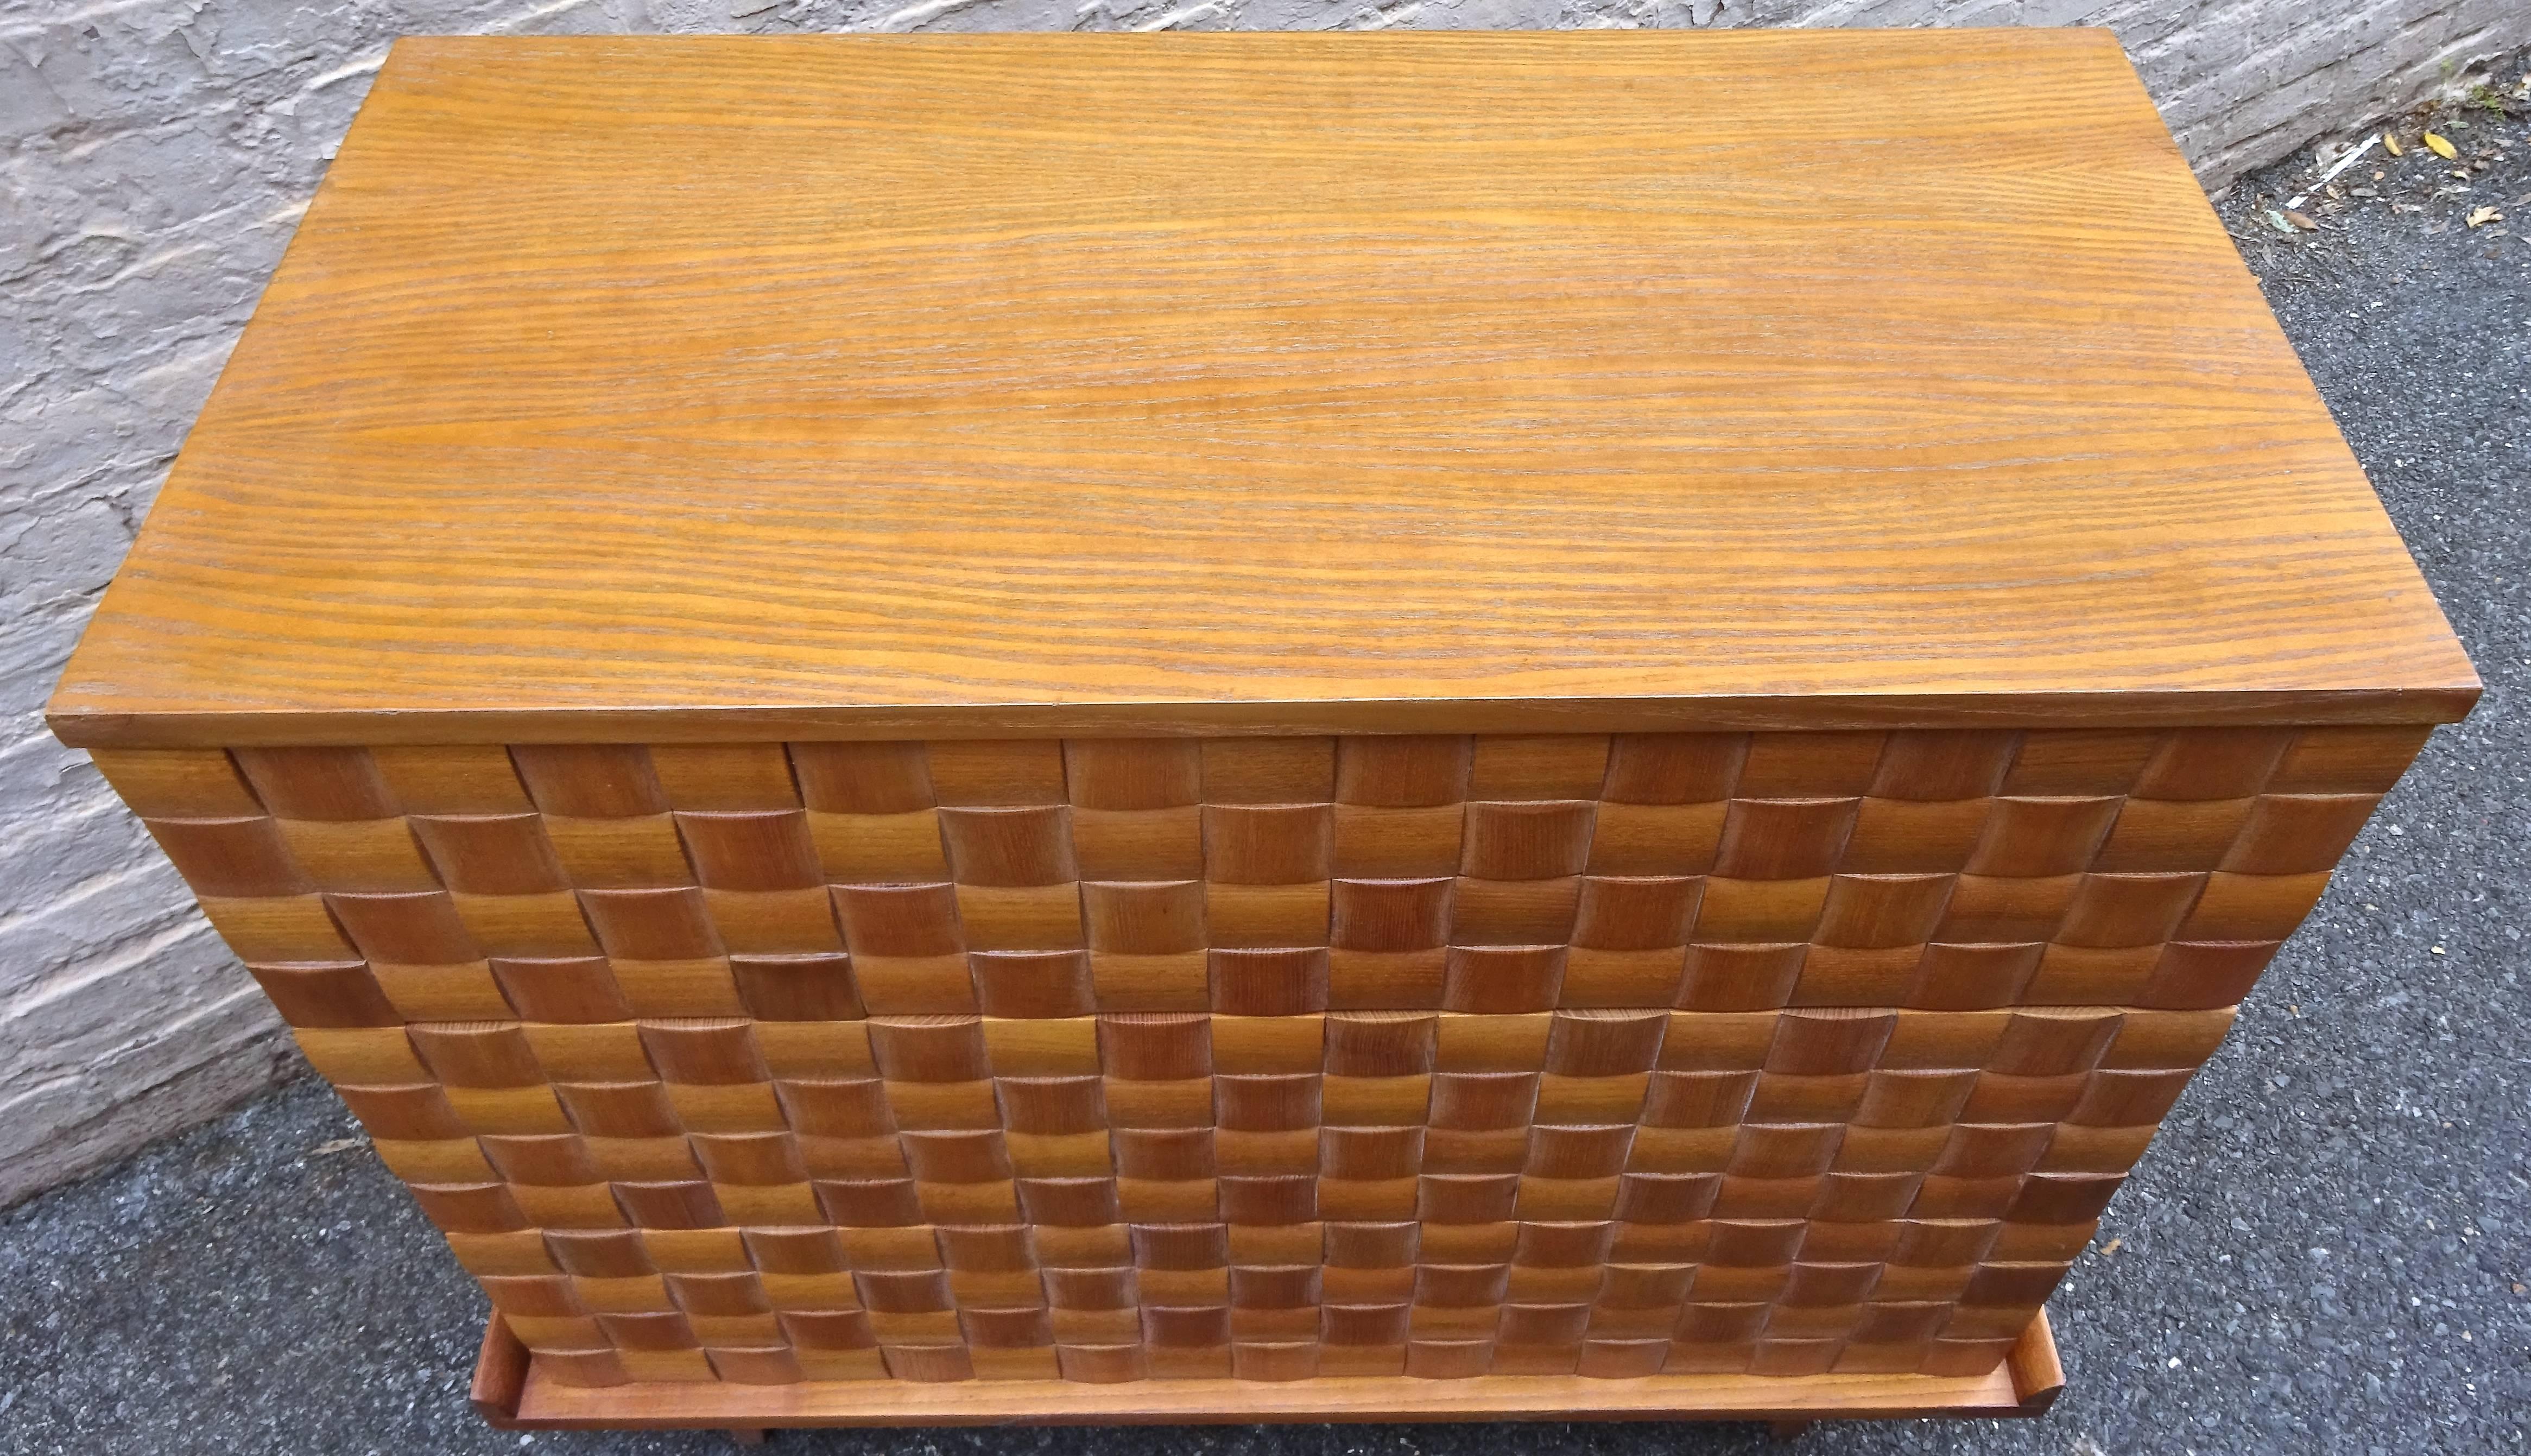 1950s American modernist Paul Laszlo chest of drawers.